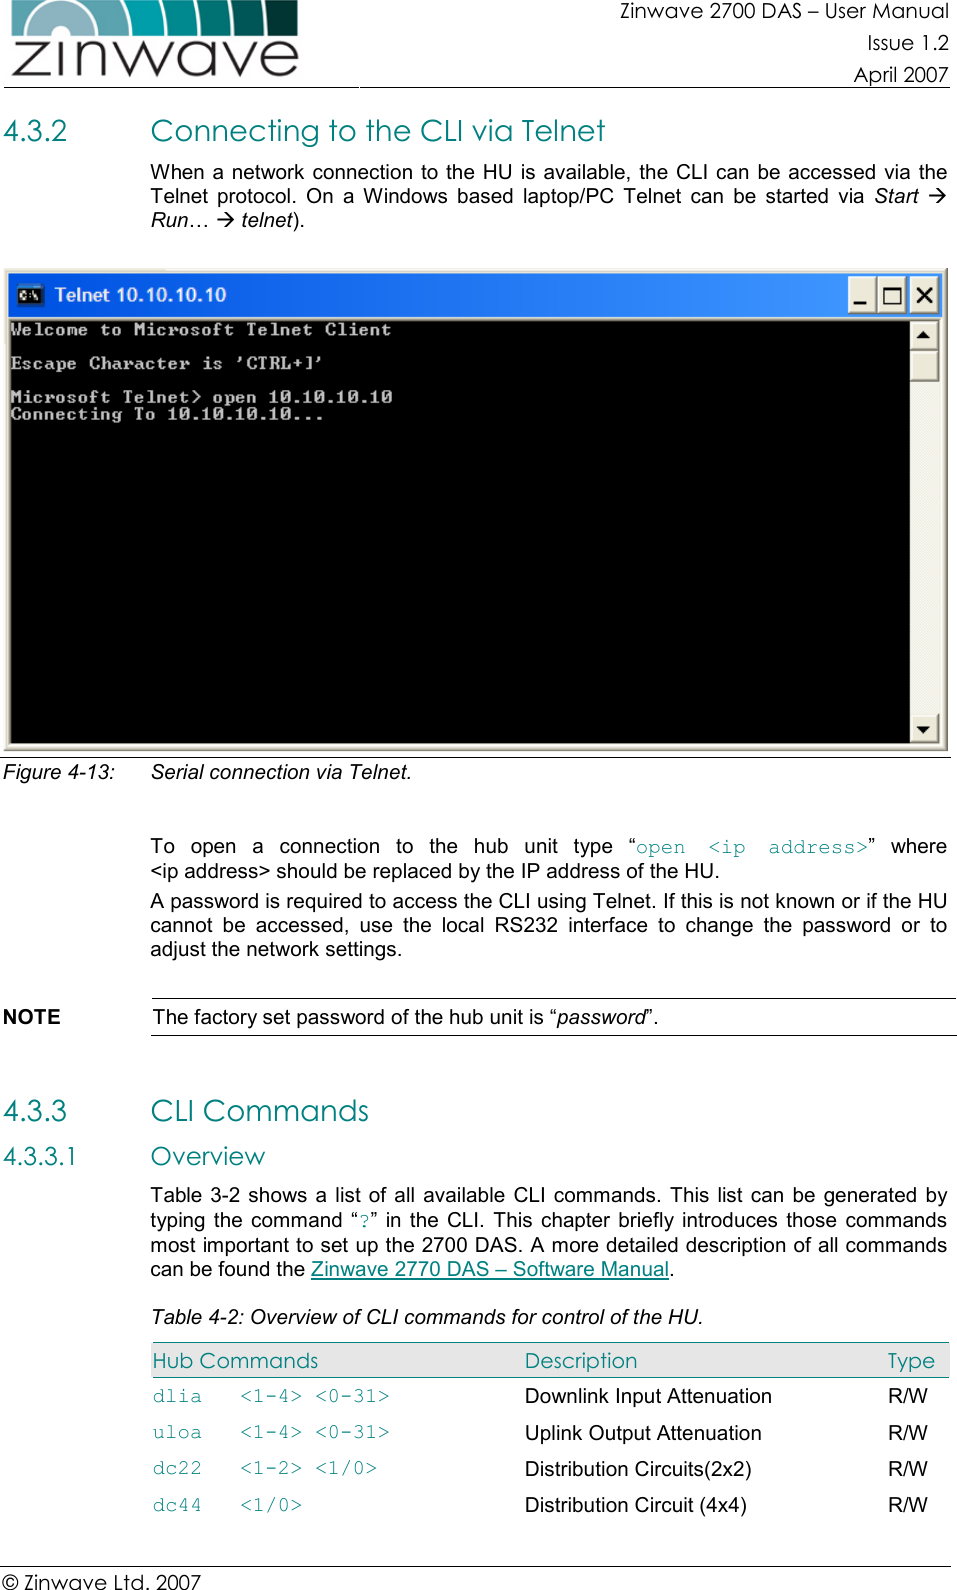 Zinwave 2700 DAS – User Manual Issue 1.2  April 2007  © Zinwave Ltd. 2007  4.3.2 Connecting to the CLI via Telnet When a network connection to the HU is available, the CLI can be accessed  via the Telnet  protocol.  On  a  Windows  based  laptop/PC  Telnet  can  be  started  via  Start  Run…  telnet).   Figure 4-13:  Serial connection via Telnet.  To  open  a  connection  to  the  hub  unit  type  “open  &lt;ip  address&gt;”  where &lt;ip address&gt; should be replaced by the IP address of the HU. A password is required to access the CLI using Telnet. If this is not known or if the HU cannot  be  accessed,  use  the  local  RS232  interface  to  change  the  password  or  to adjust the network settings.  NOTE  The factory set password of the hub unit is “password”.  4.3.3 CLI Commands 4.3.3.1 Overview Table 3-2  shows a  list of all  available CLI commands. This  list  can be  generated  by typing the  command  “?”  in the CLI.  This  chapter  briefly  introduces  those  commands most important to set up the 2700 DAS. A more detailed description of all commands can be found the Zinwave 2770 DAS – Software Manual. Table 4-2: Overview of CLI commands for control of the HU. Hub Commands  Description  Type dlia   &lt;1-4&gt; &lt;0-31&gt;  Downlink Input Attenuation  R/W uloa   &lt;1-4&gt; &lt;0-31&gt;               Uplink Output Attenuation  R/W dc22   &lt;1-2&gt; &lt;1/0&gt;  Distribution Circuits(2x2)  R/W dc44   &lt;1/0&gt;                      Distribution Circuit (4x4)  R/W 